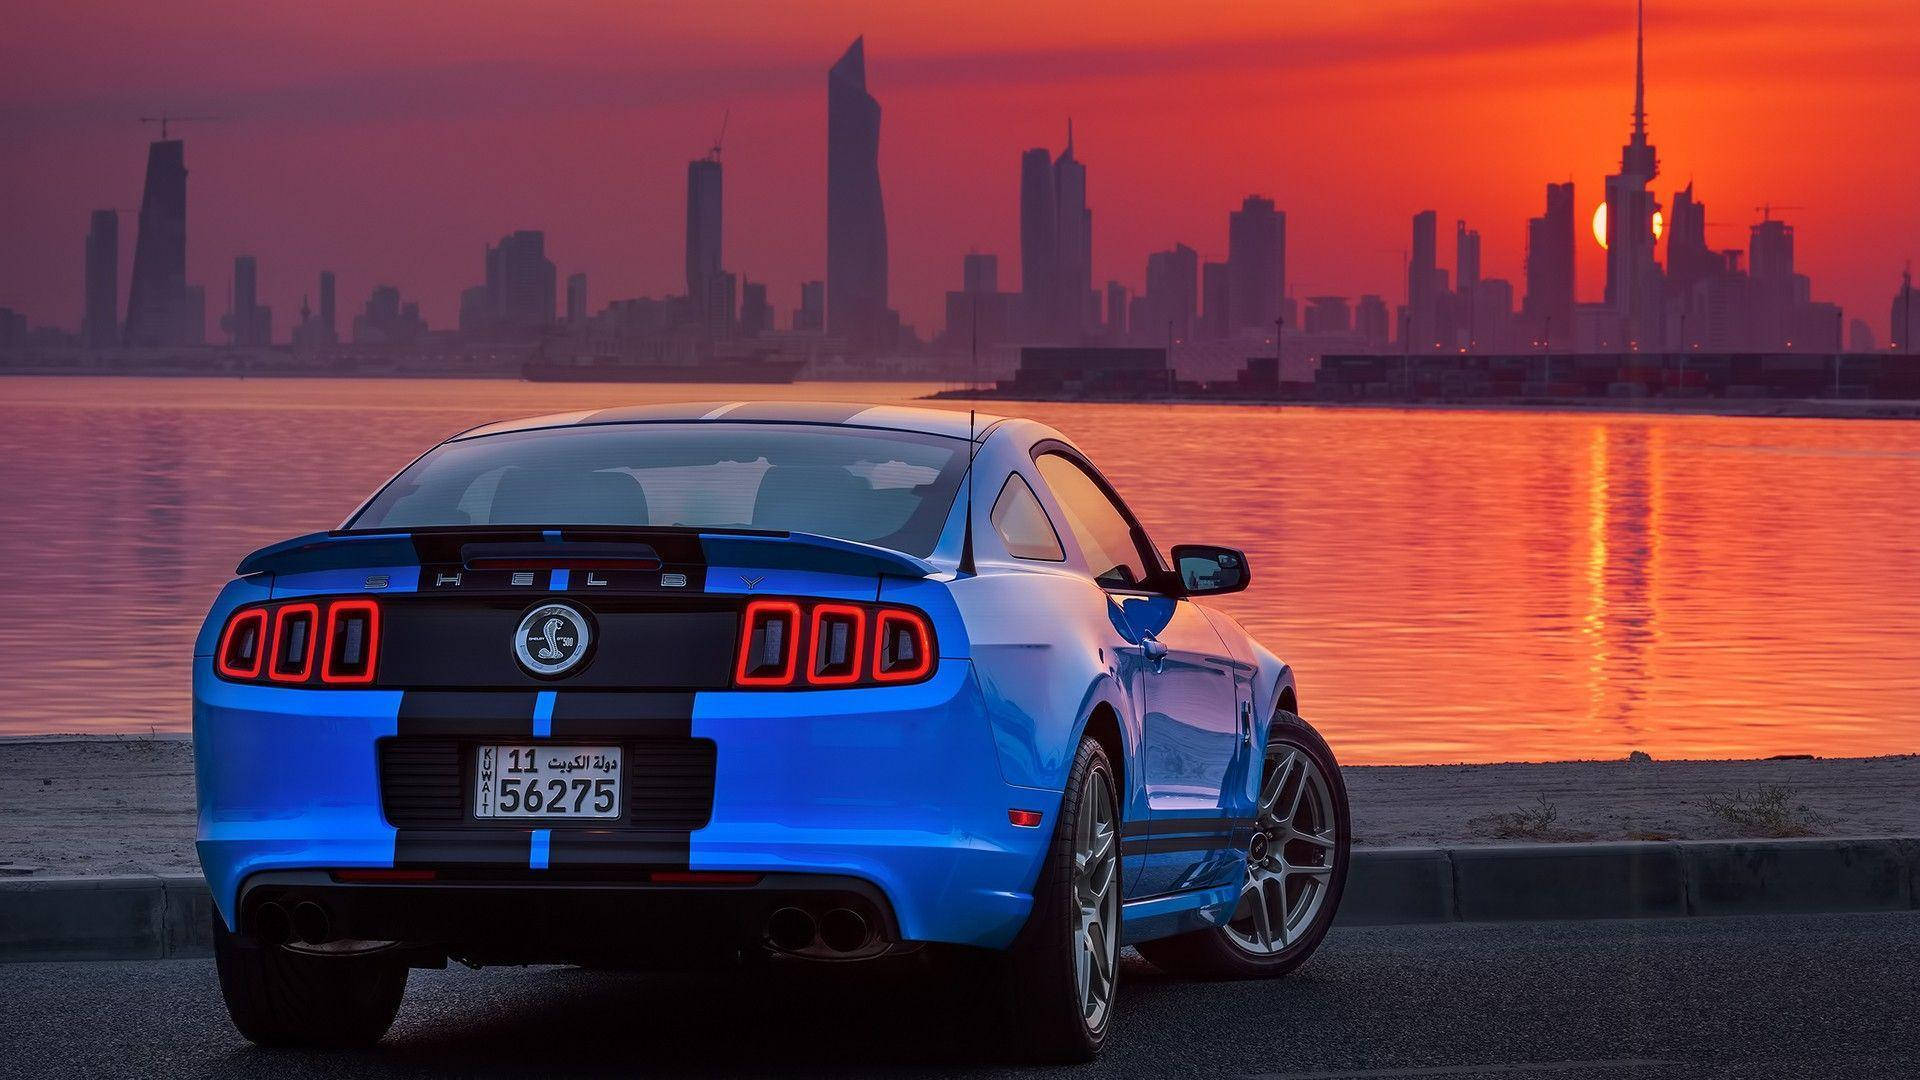 Kuwait City With Ford Shelby Background